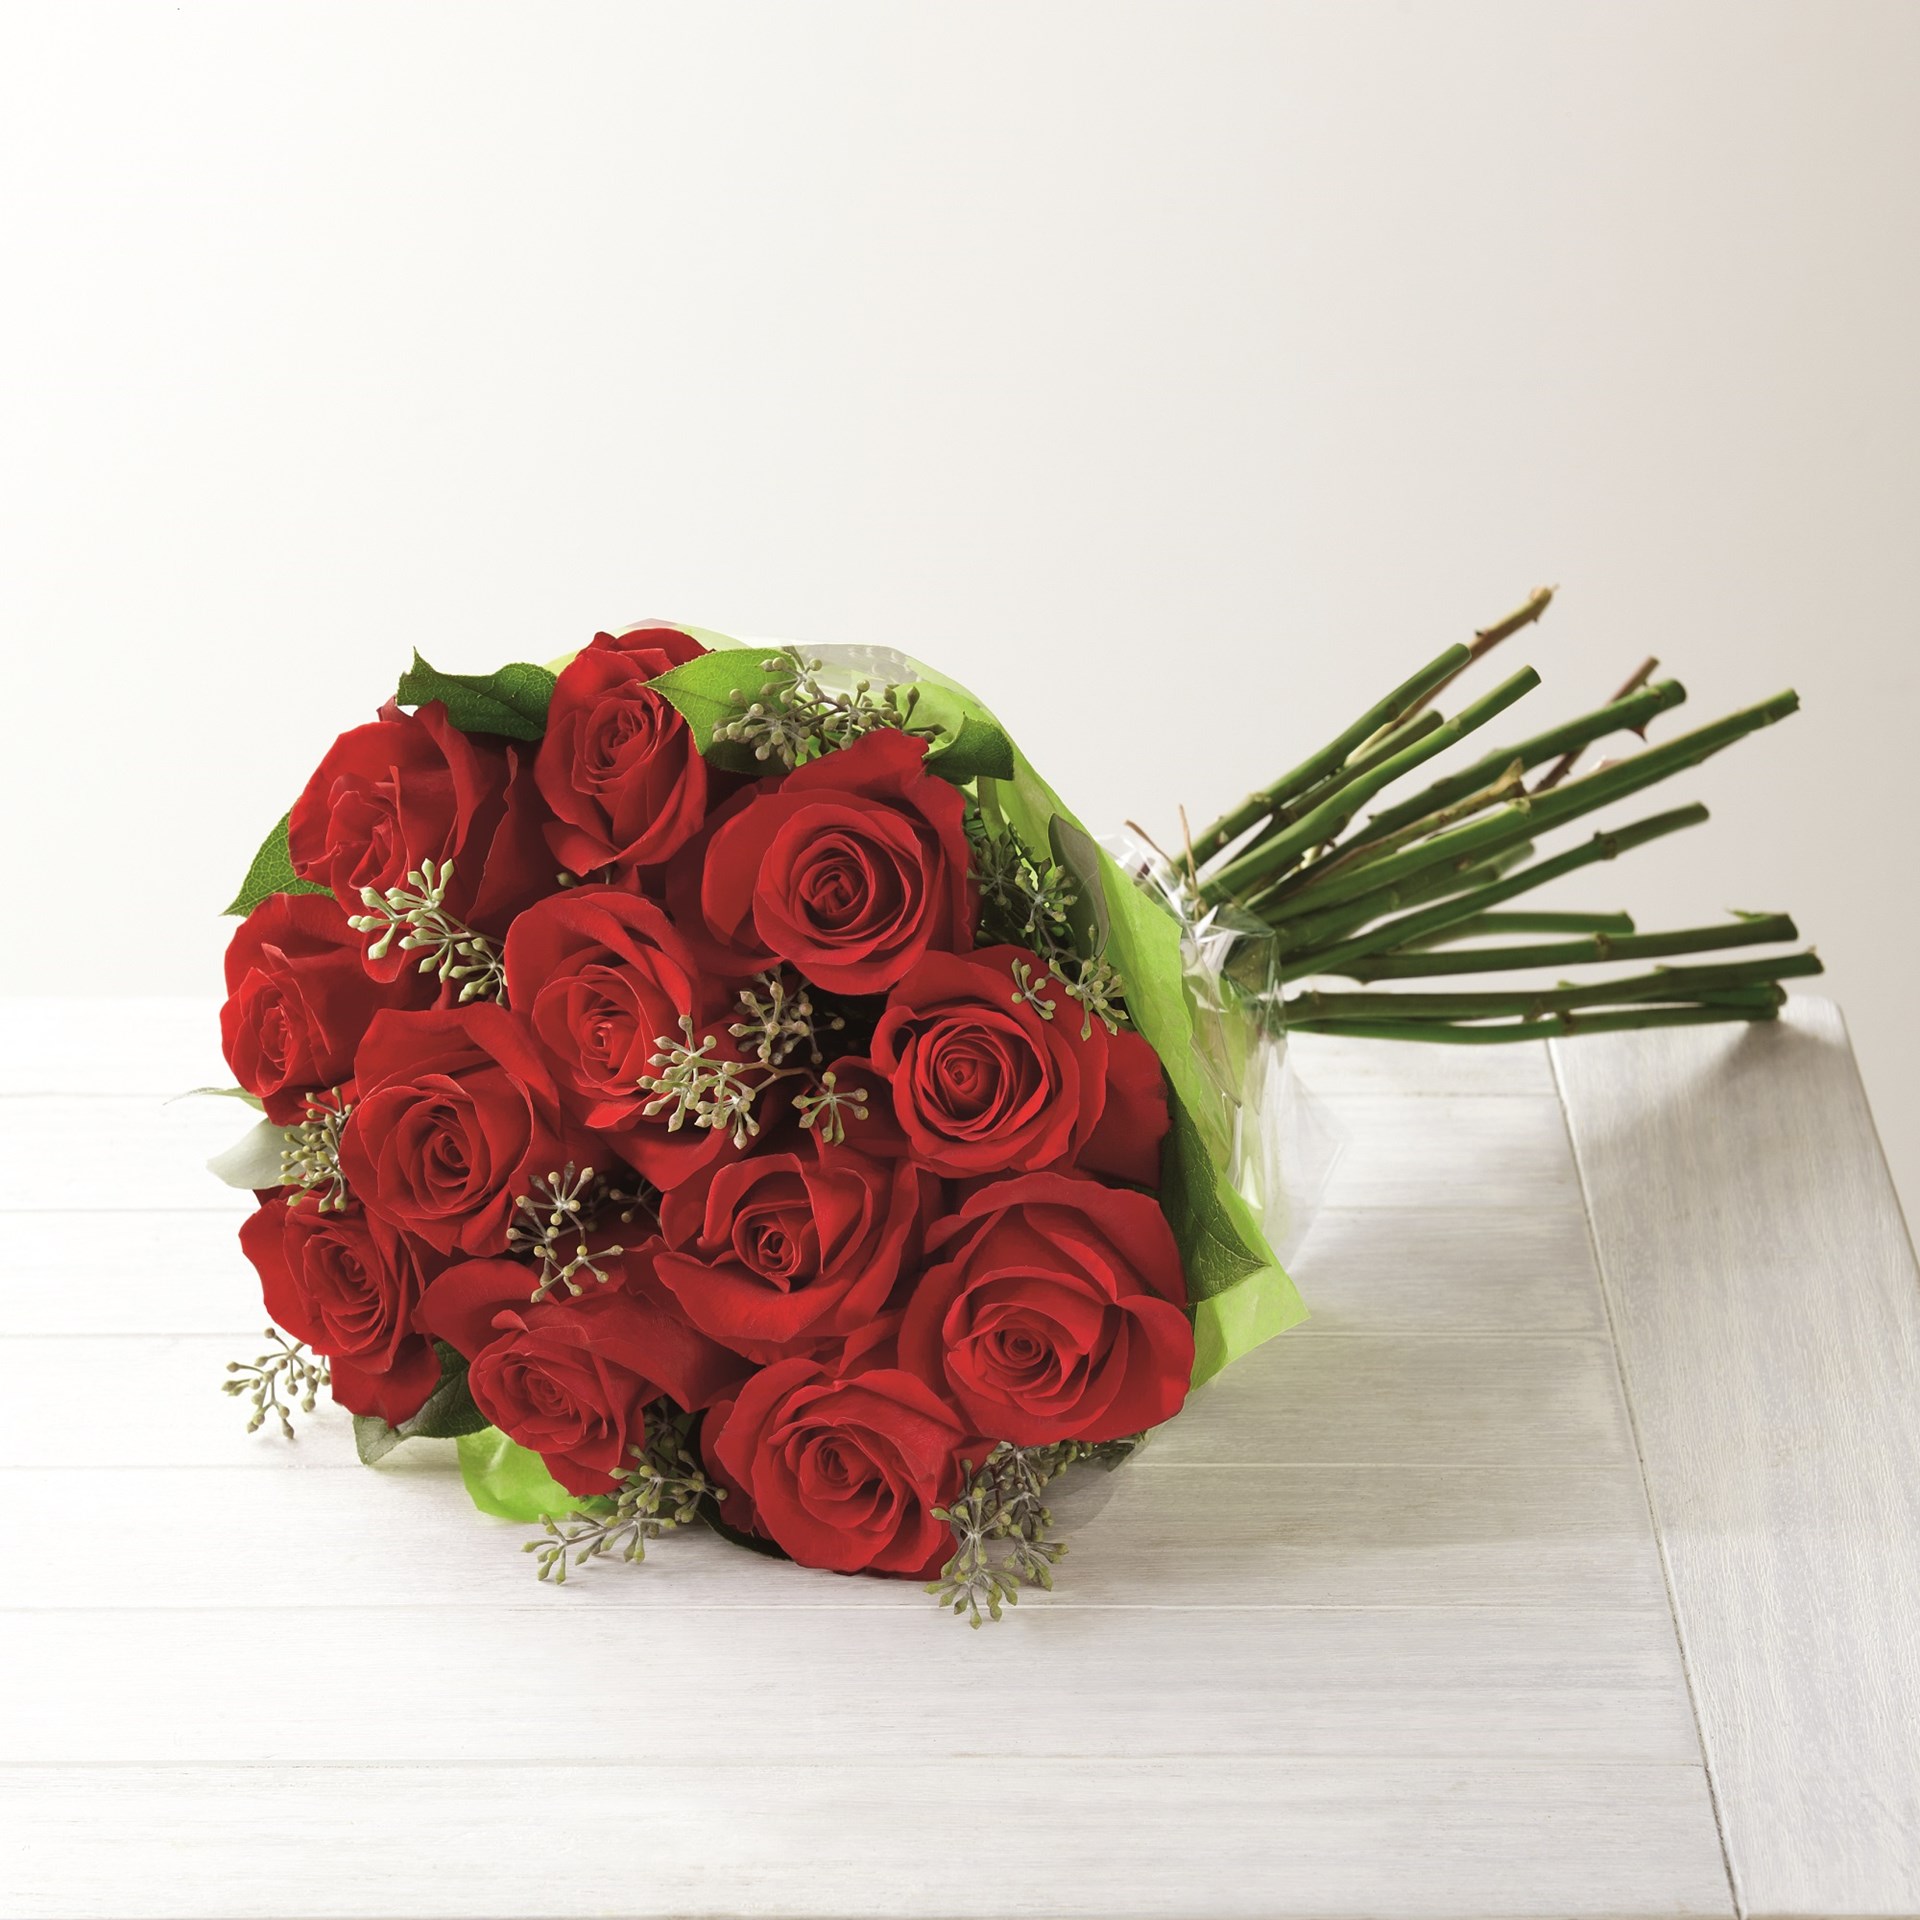 product image for The Long Stem Red Rose Bouquet by FTD - VASE INCLUDED